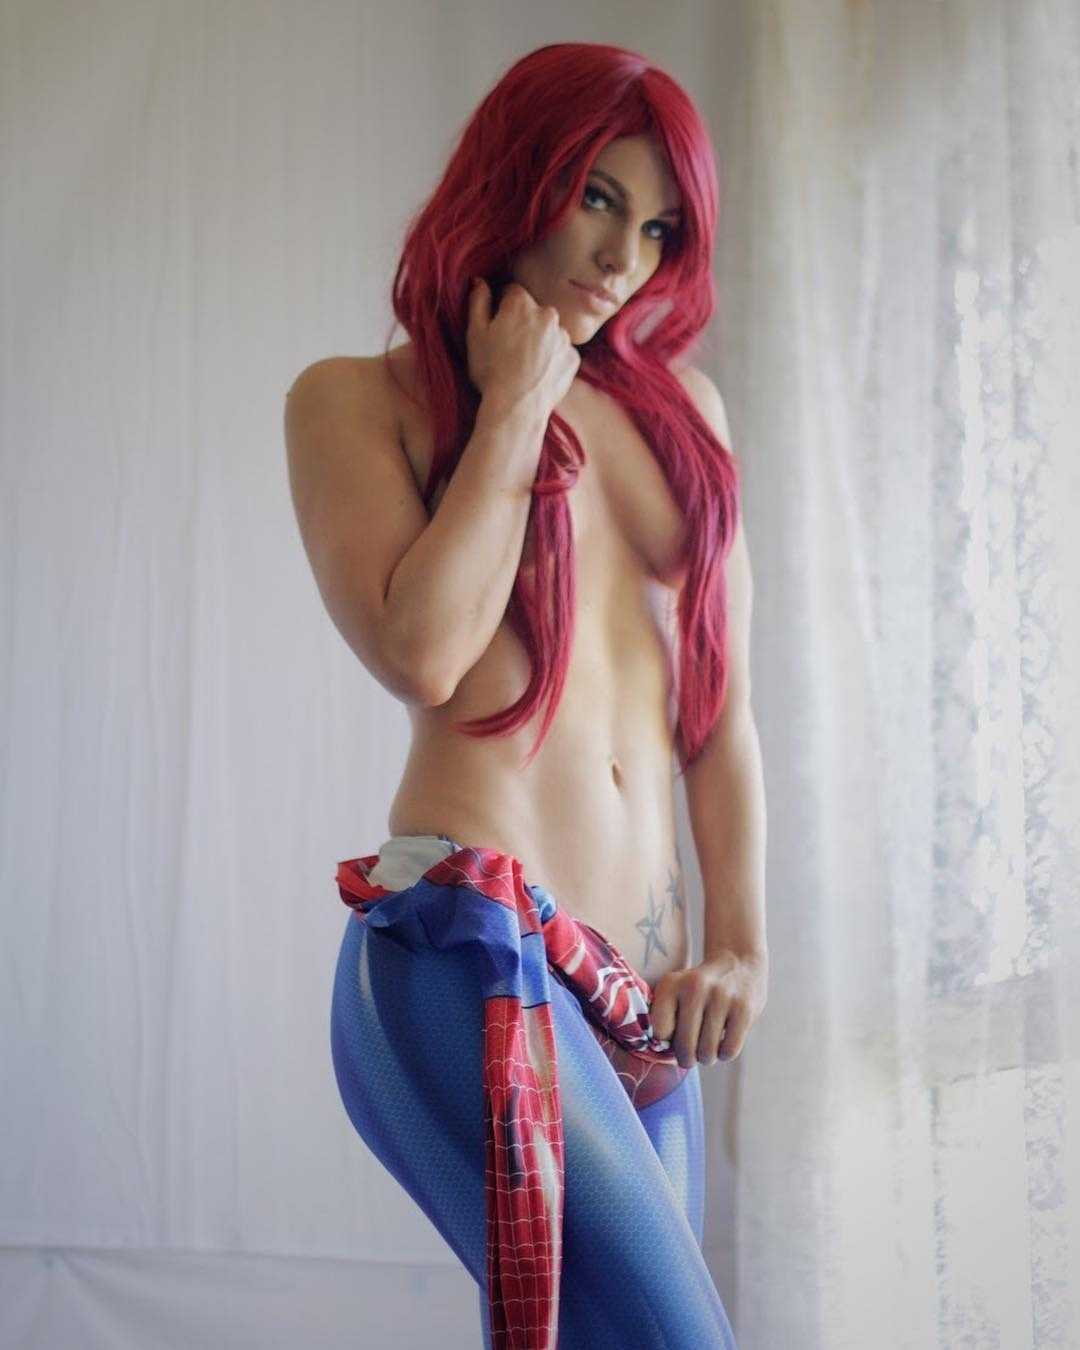 51 Hot Pictures Of Mary Jane Watson Which Demonstrate She Is The Hottest Lady On Earth 3